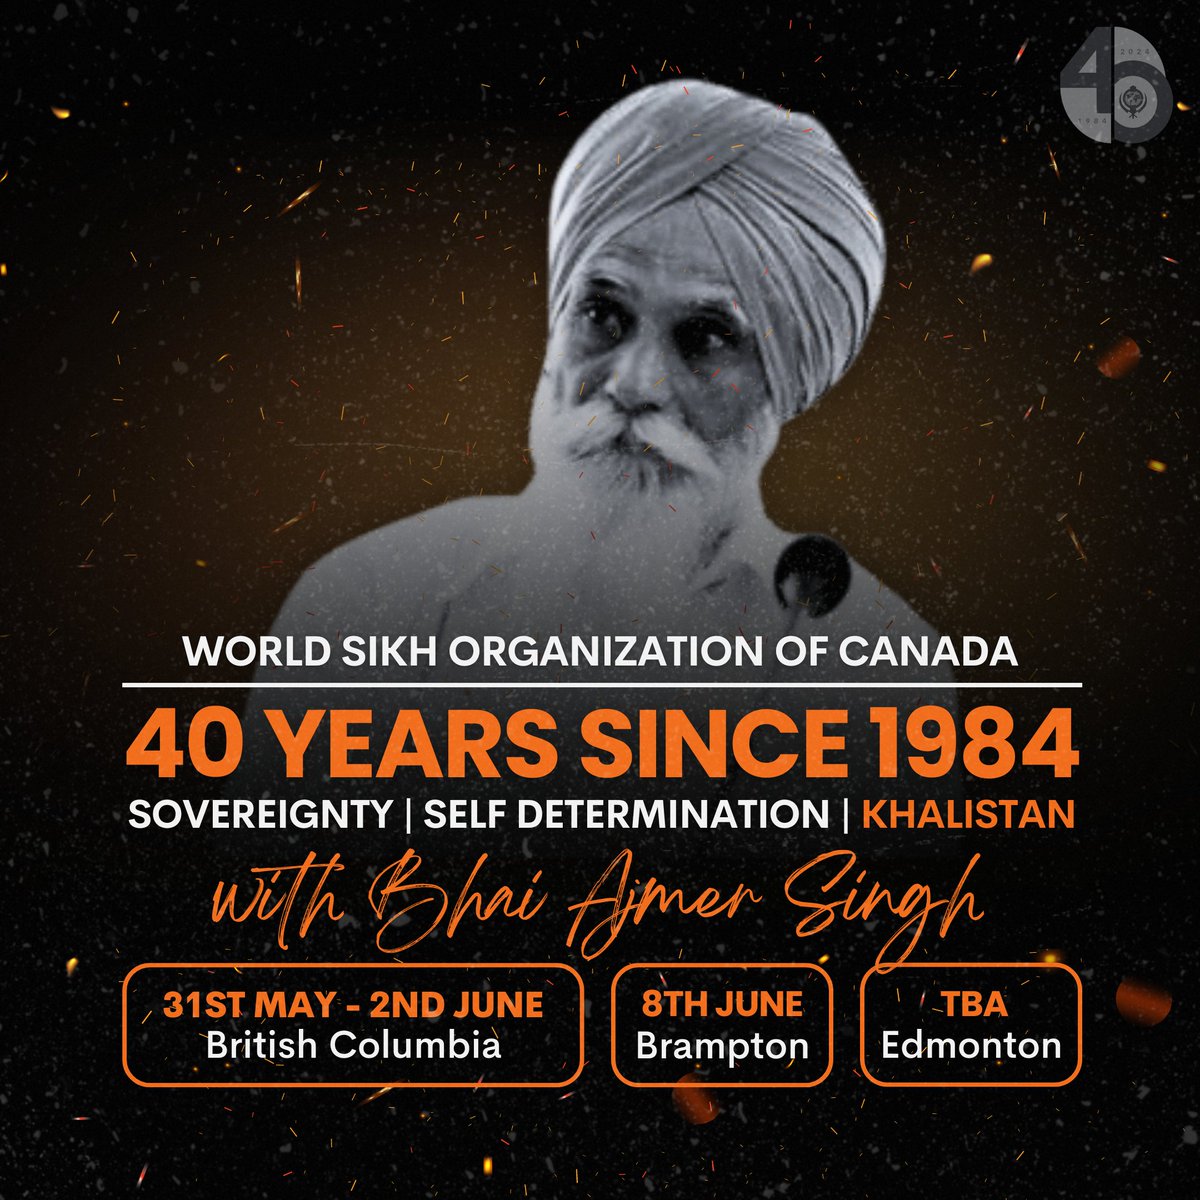 Join us for these events across Canada to commemorate the 40th anniversary of 1984, with special guest speaker Bhai Ajmer Singh. Bhai Sahib is prominent Sikh commentator and author who has written several books on Sikh principles, history, and Sikh sovereignty.

Look out for…